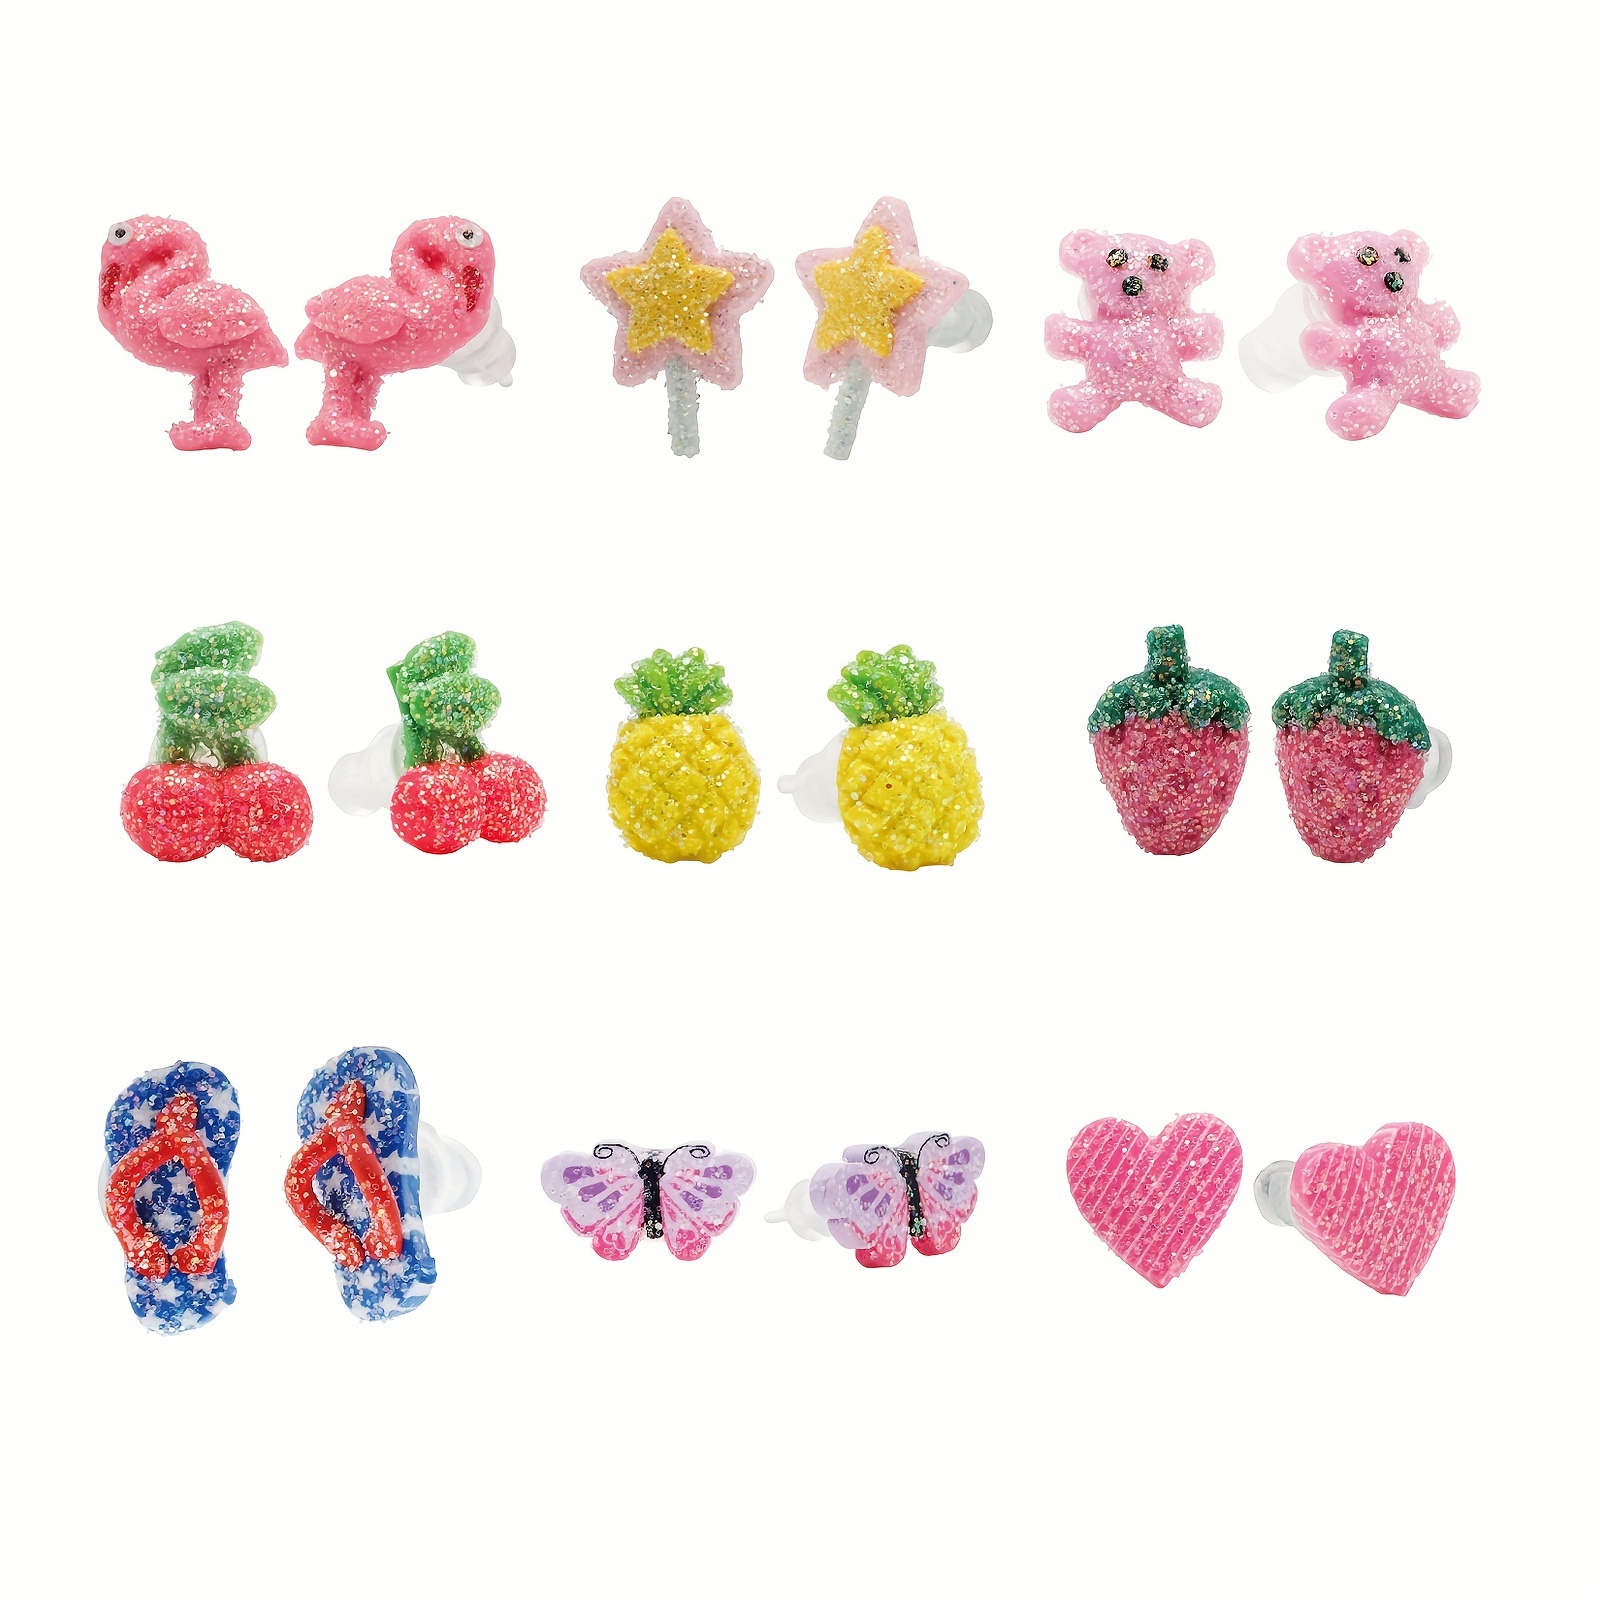 9 Pairs Hypoallergenic Stud Earrings For Girls, Flamingo, Bear, Cherry  Pattern Polymer Clay Earrings Set, Birthday Holiday Party Gift For Girls